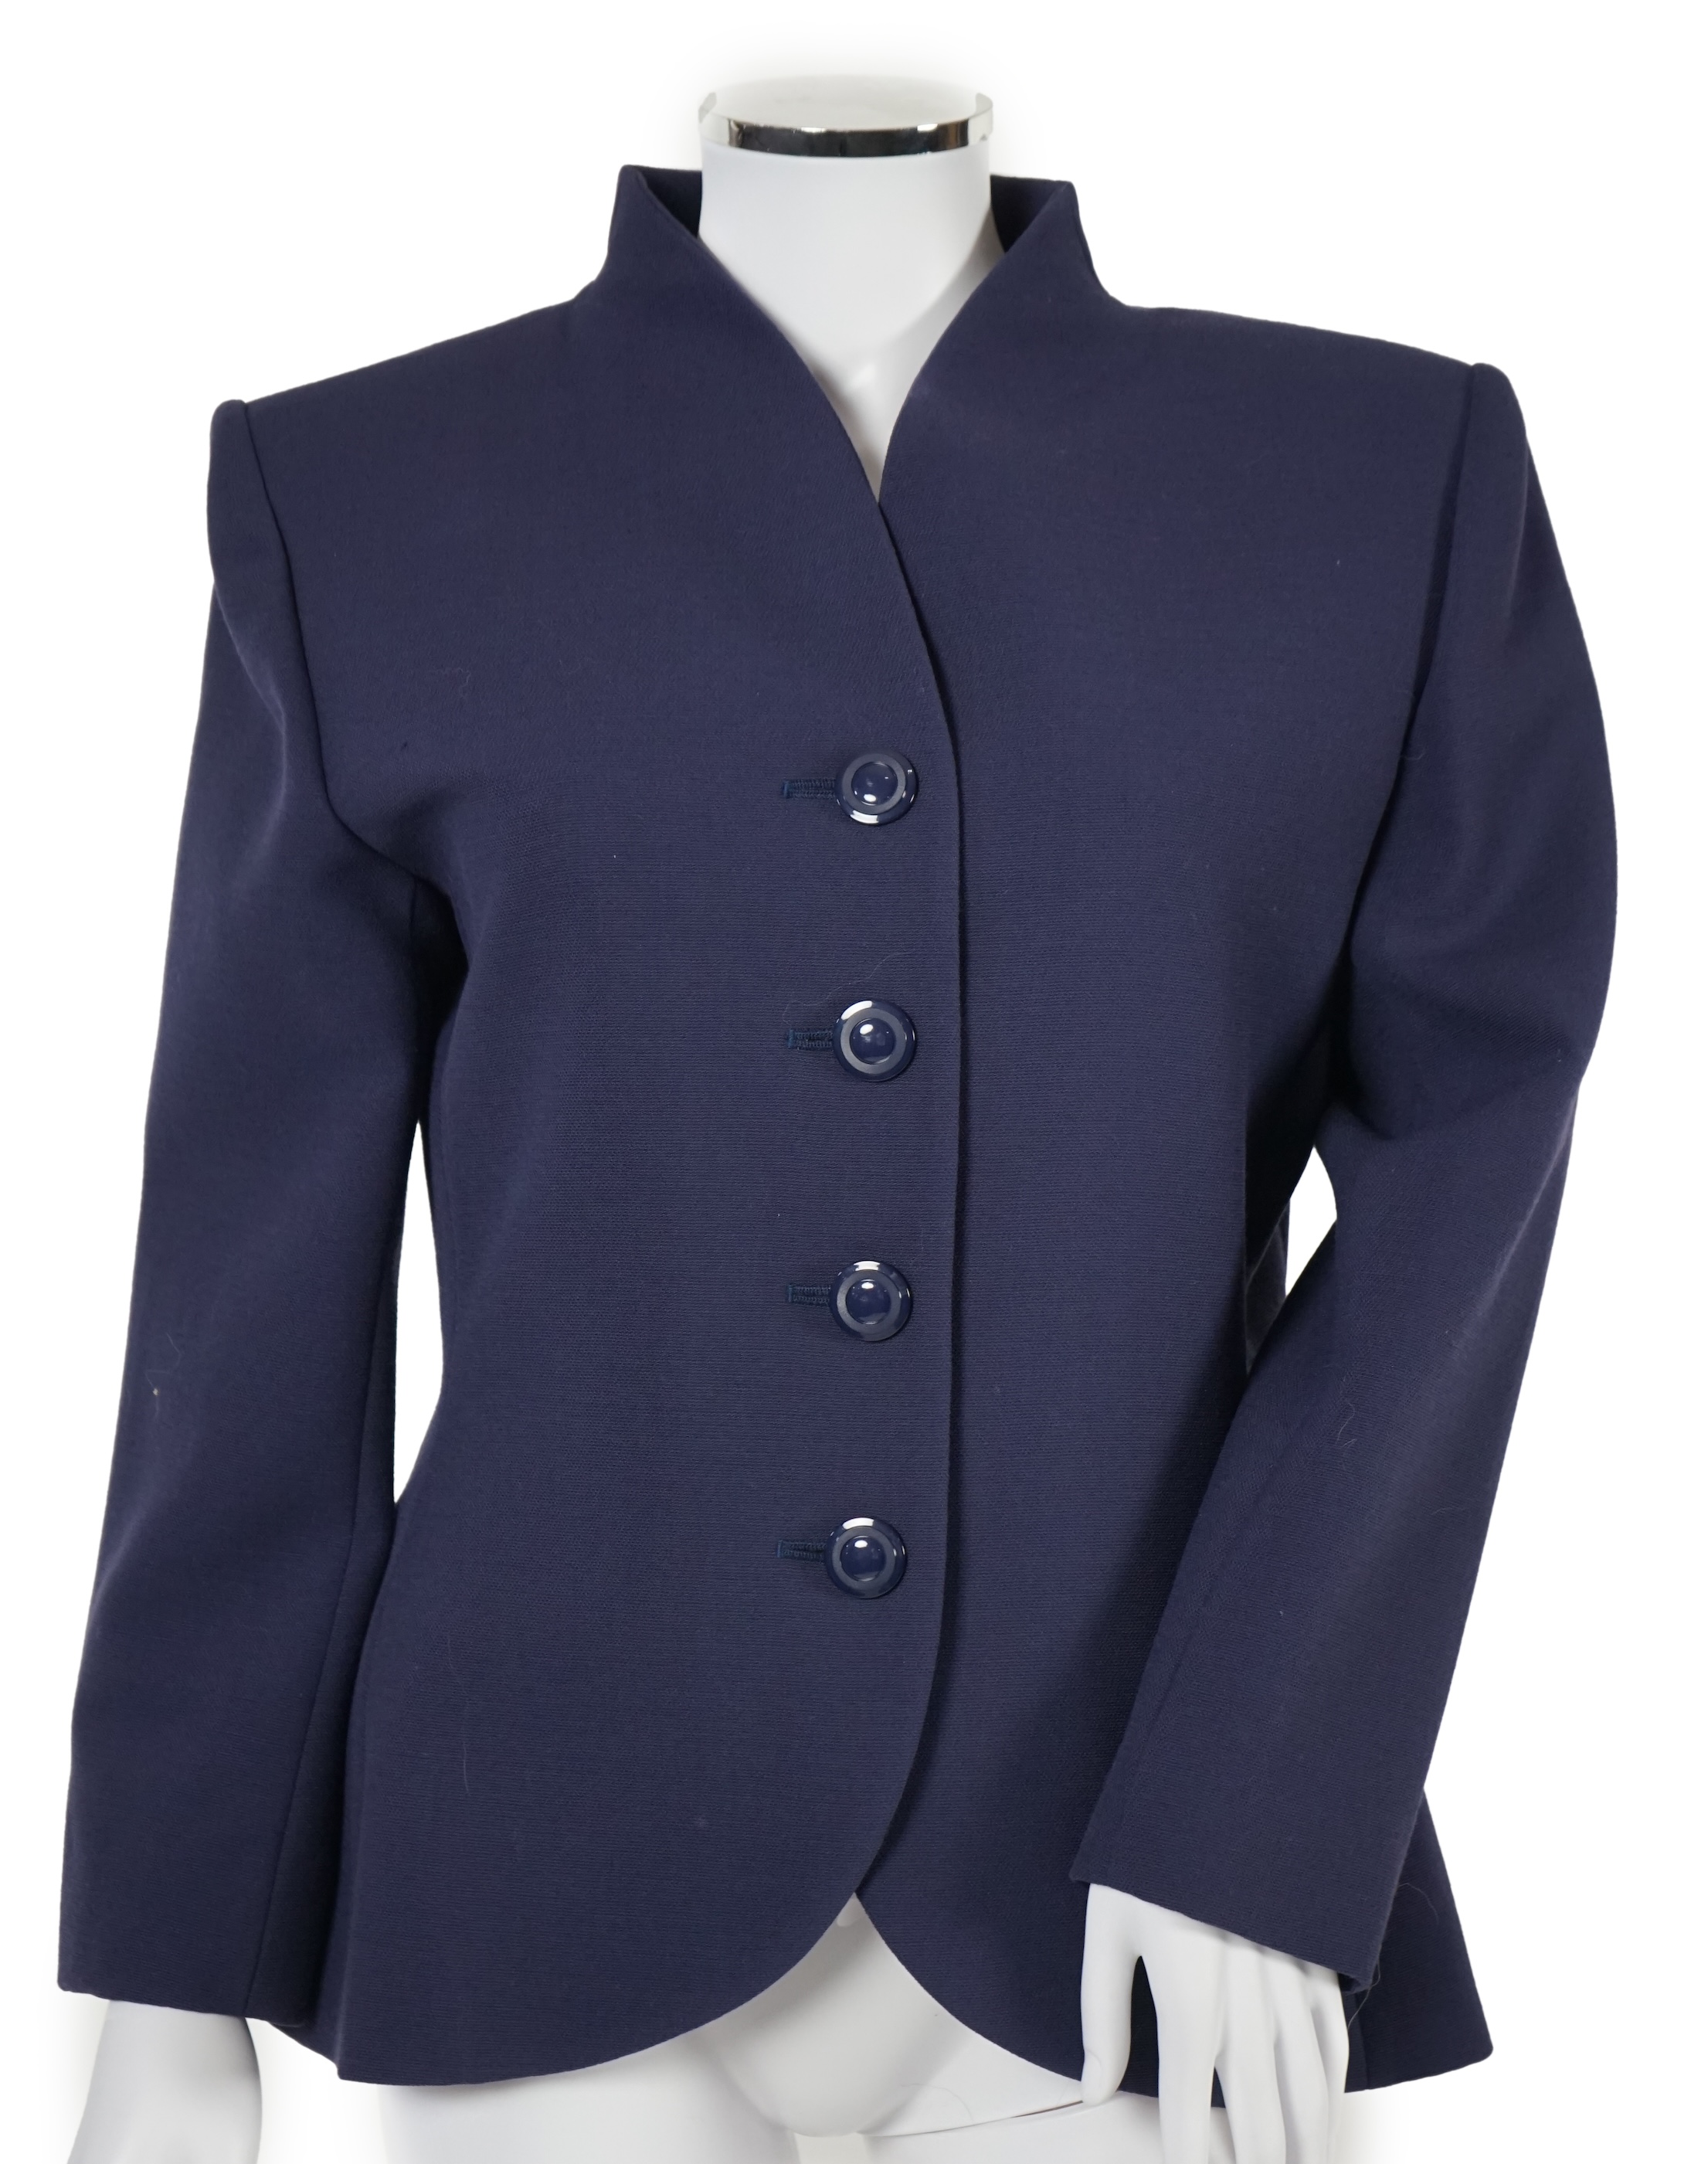 A vintage Yves Saint Laurent variation lady's navy wool skirt suit, F 42 (UK 14).Please note alterations to make the waist smaller may have been carried out on some of the skirts. Proceeds to Happy Paws Puppy Rescue.